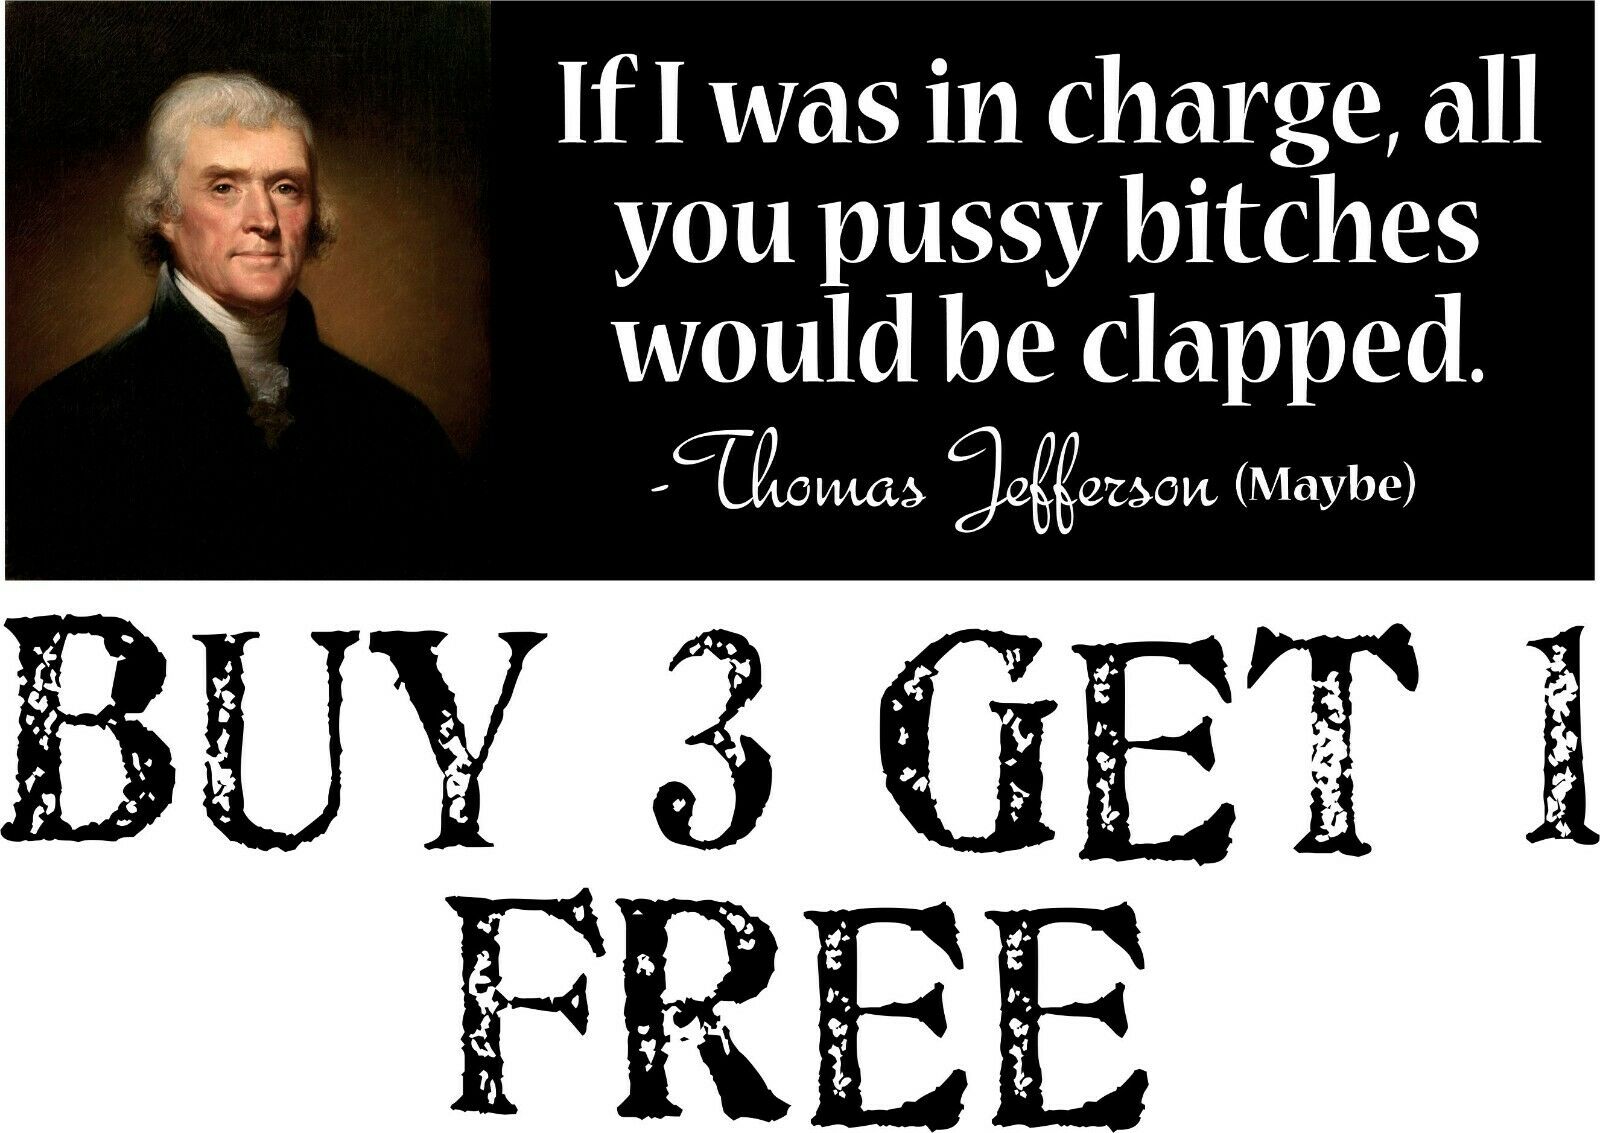 Thomas Jefferson AUTO MAGNET Pussy Bit*hes would be clapped MAGNET 8.7" x 3" - Powercall Sirens LLC